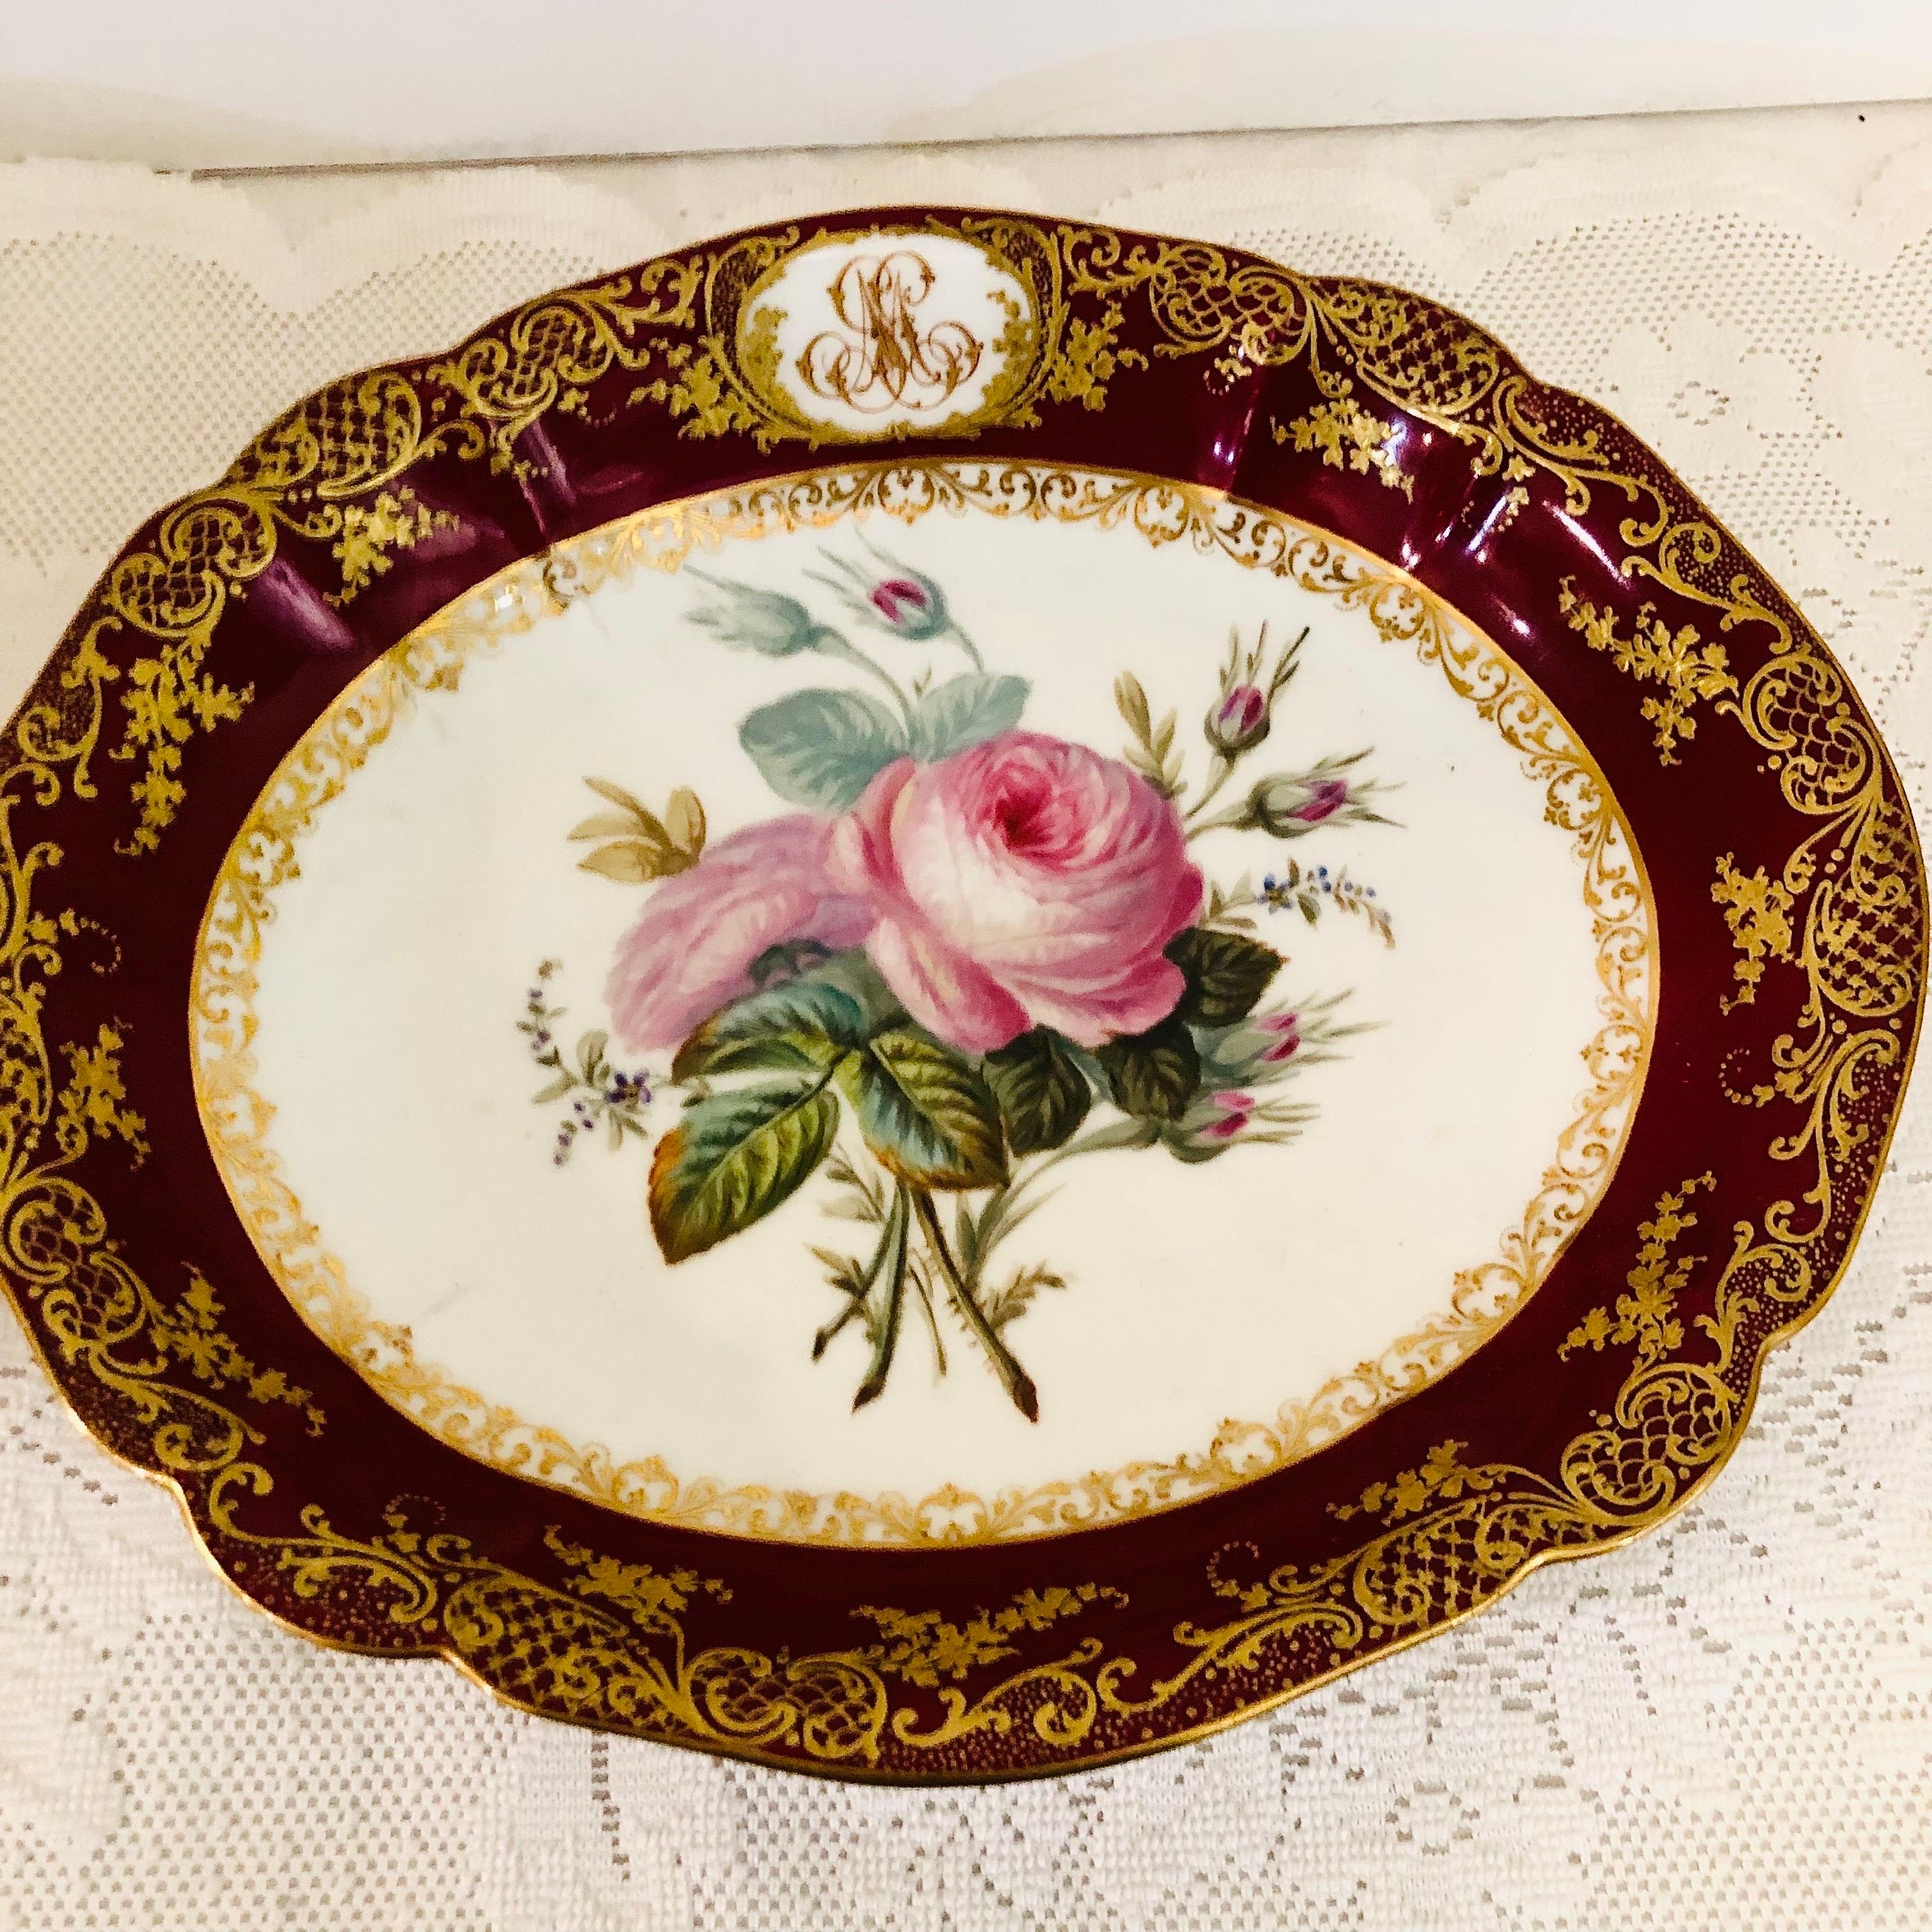 Rococo Old Paris Porcelain Oval Bowl Masterfully Painted With a Bouquet of Pink Roses